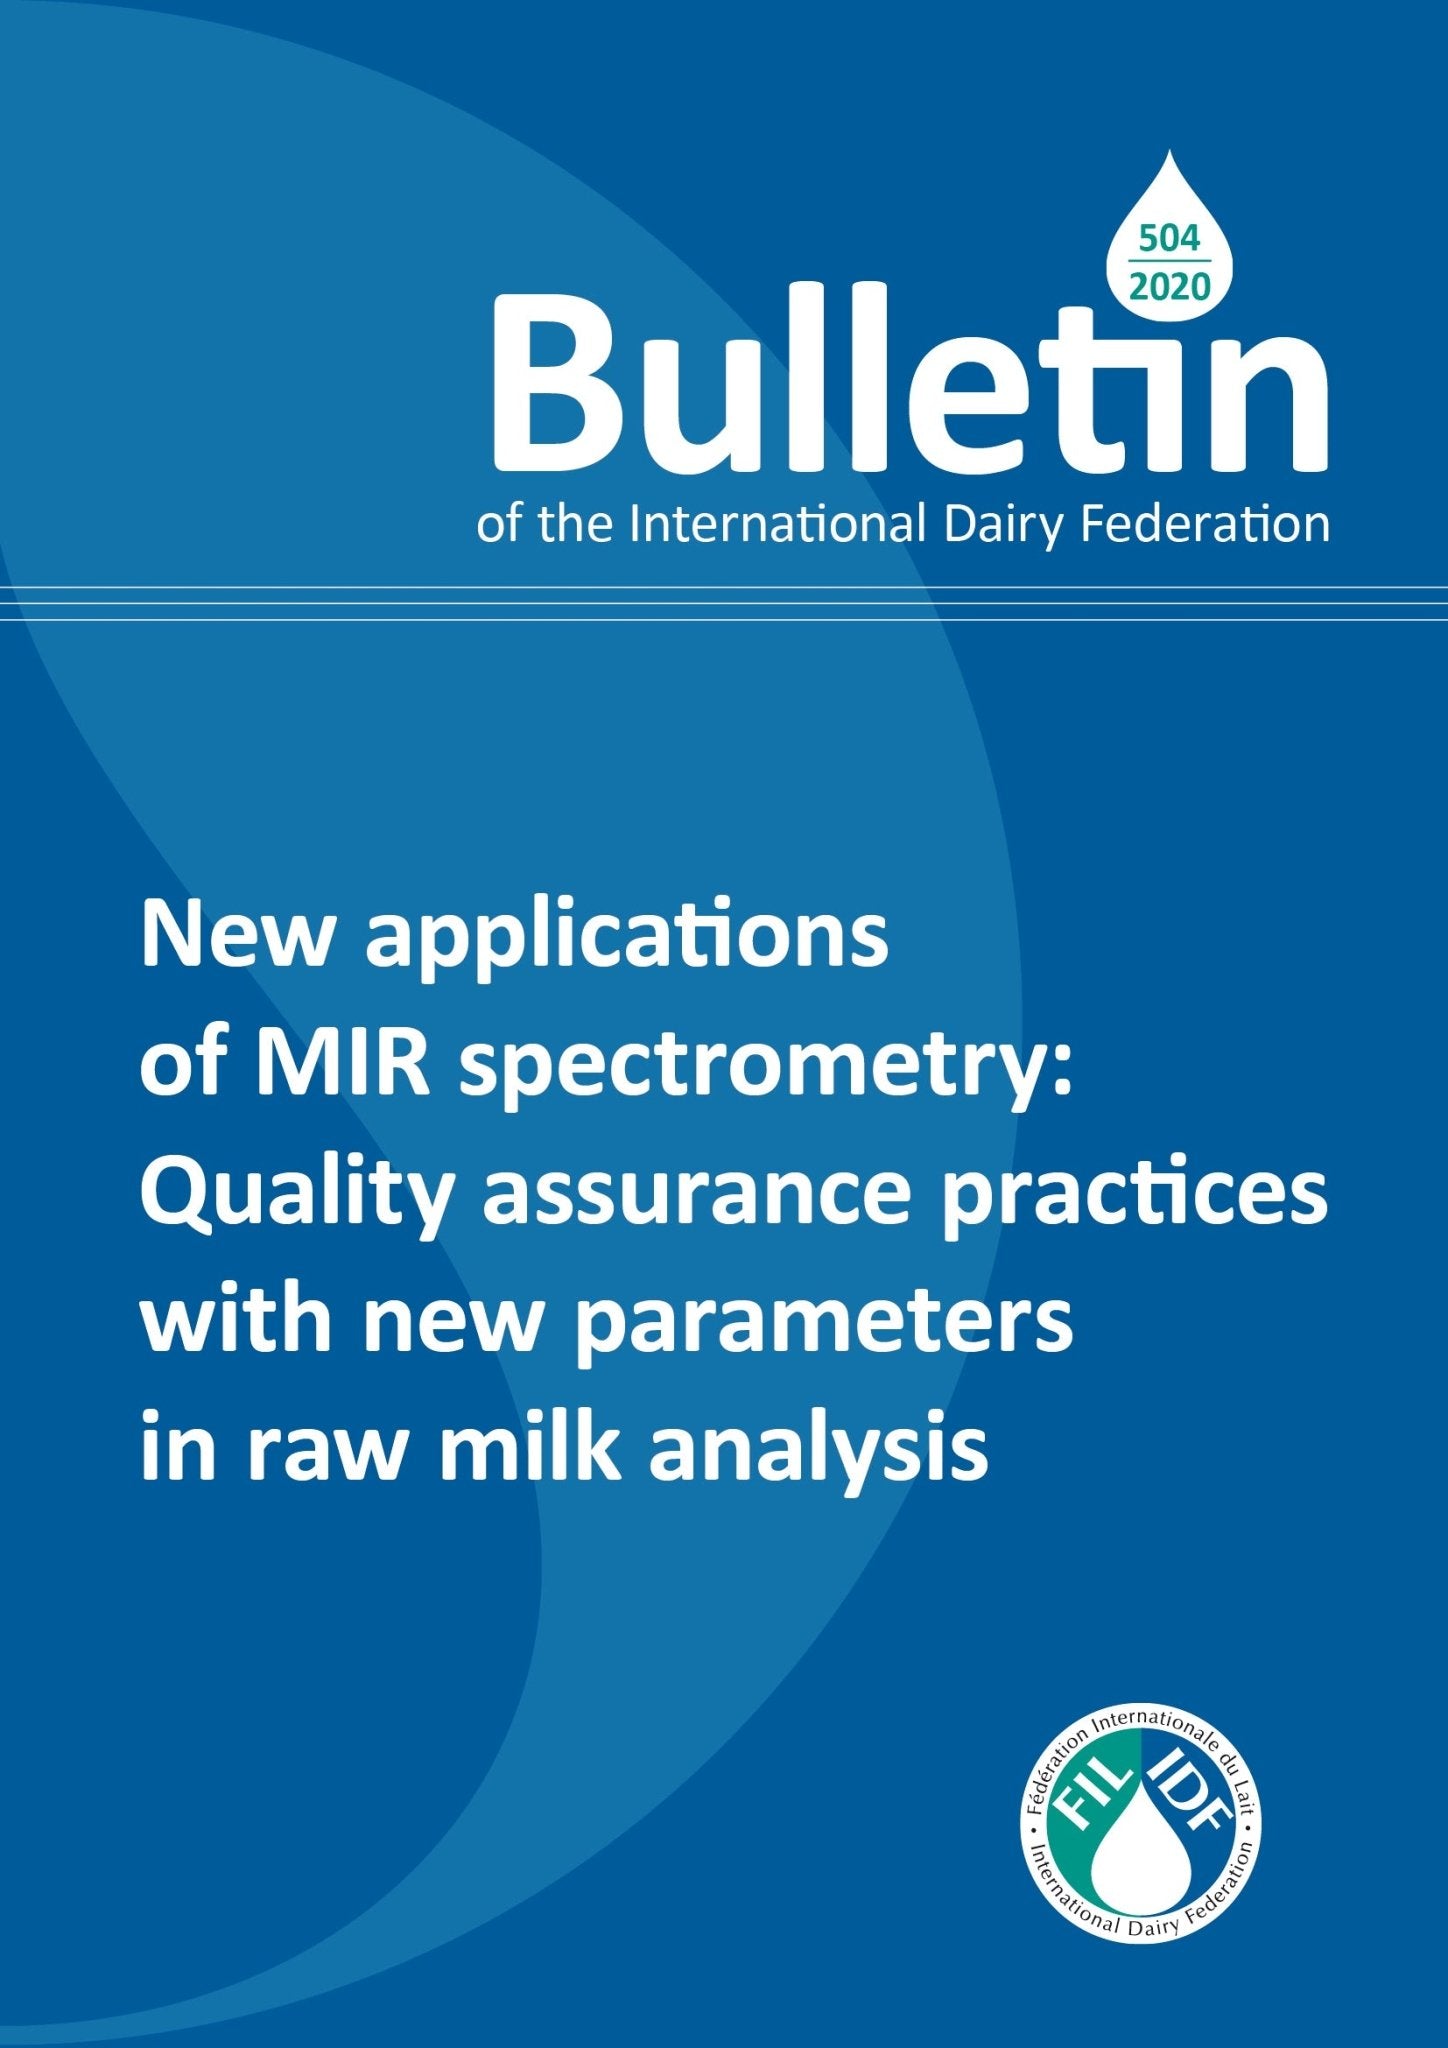 Bulletin of the IDF N° 504/2020: New applications of MIR spectrometry: Quality assurance practices with new parameters in raw milk analysis - FIL-IDF